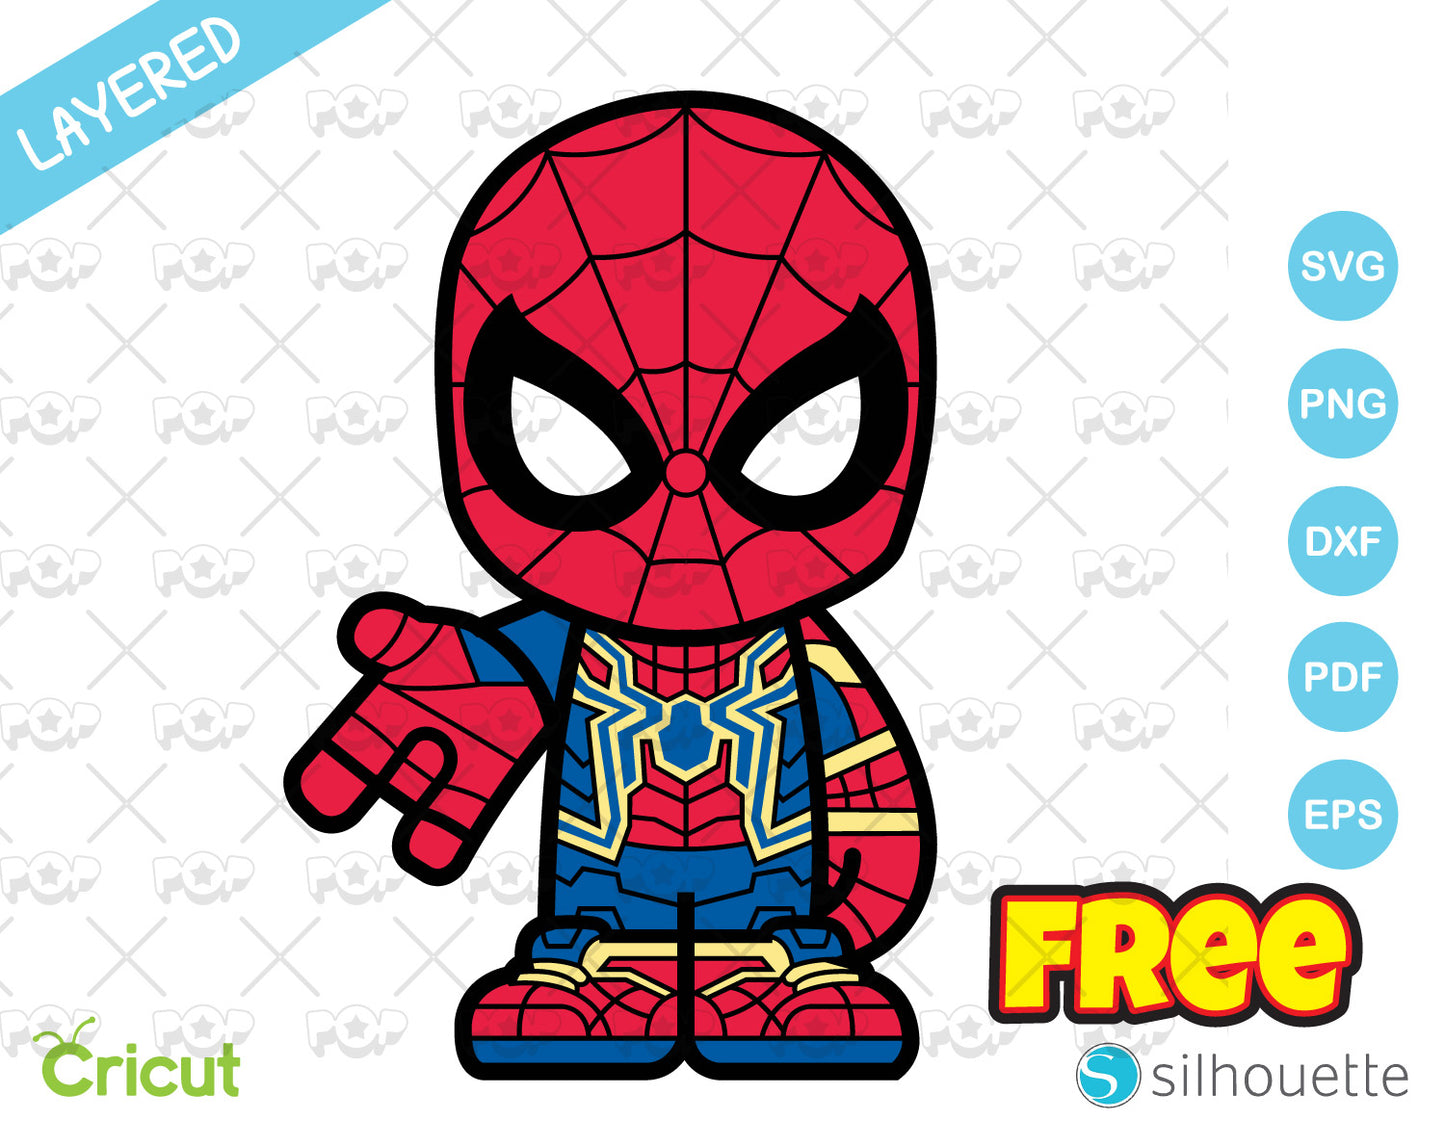 FREE Spiderman clipart, Free Marvel SVG cut file for cricut silhouette, SVG, PNG, DXF, instant download